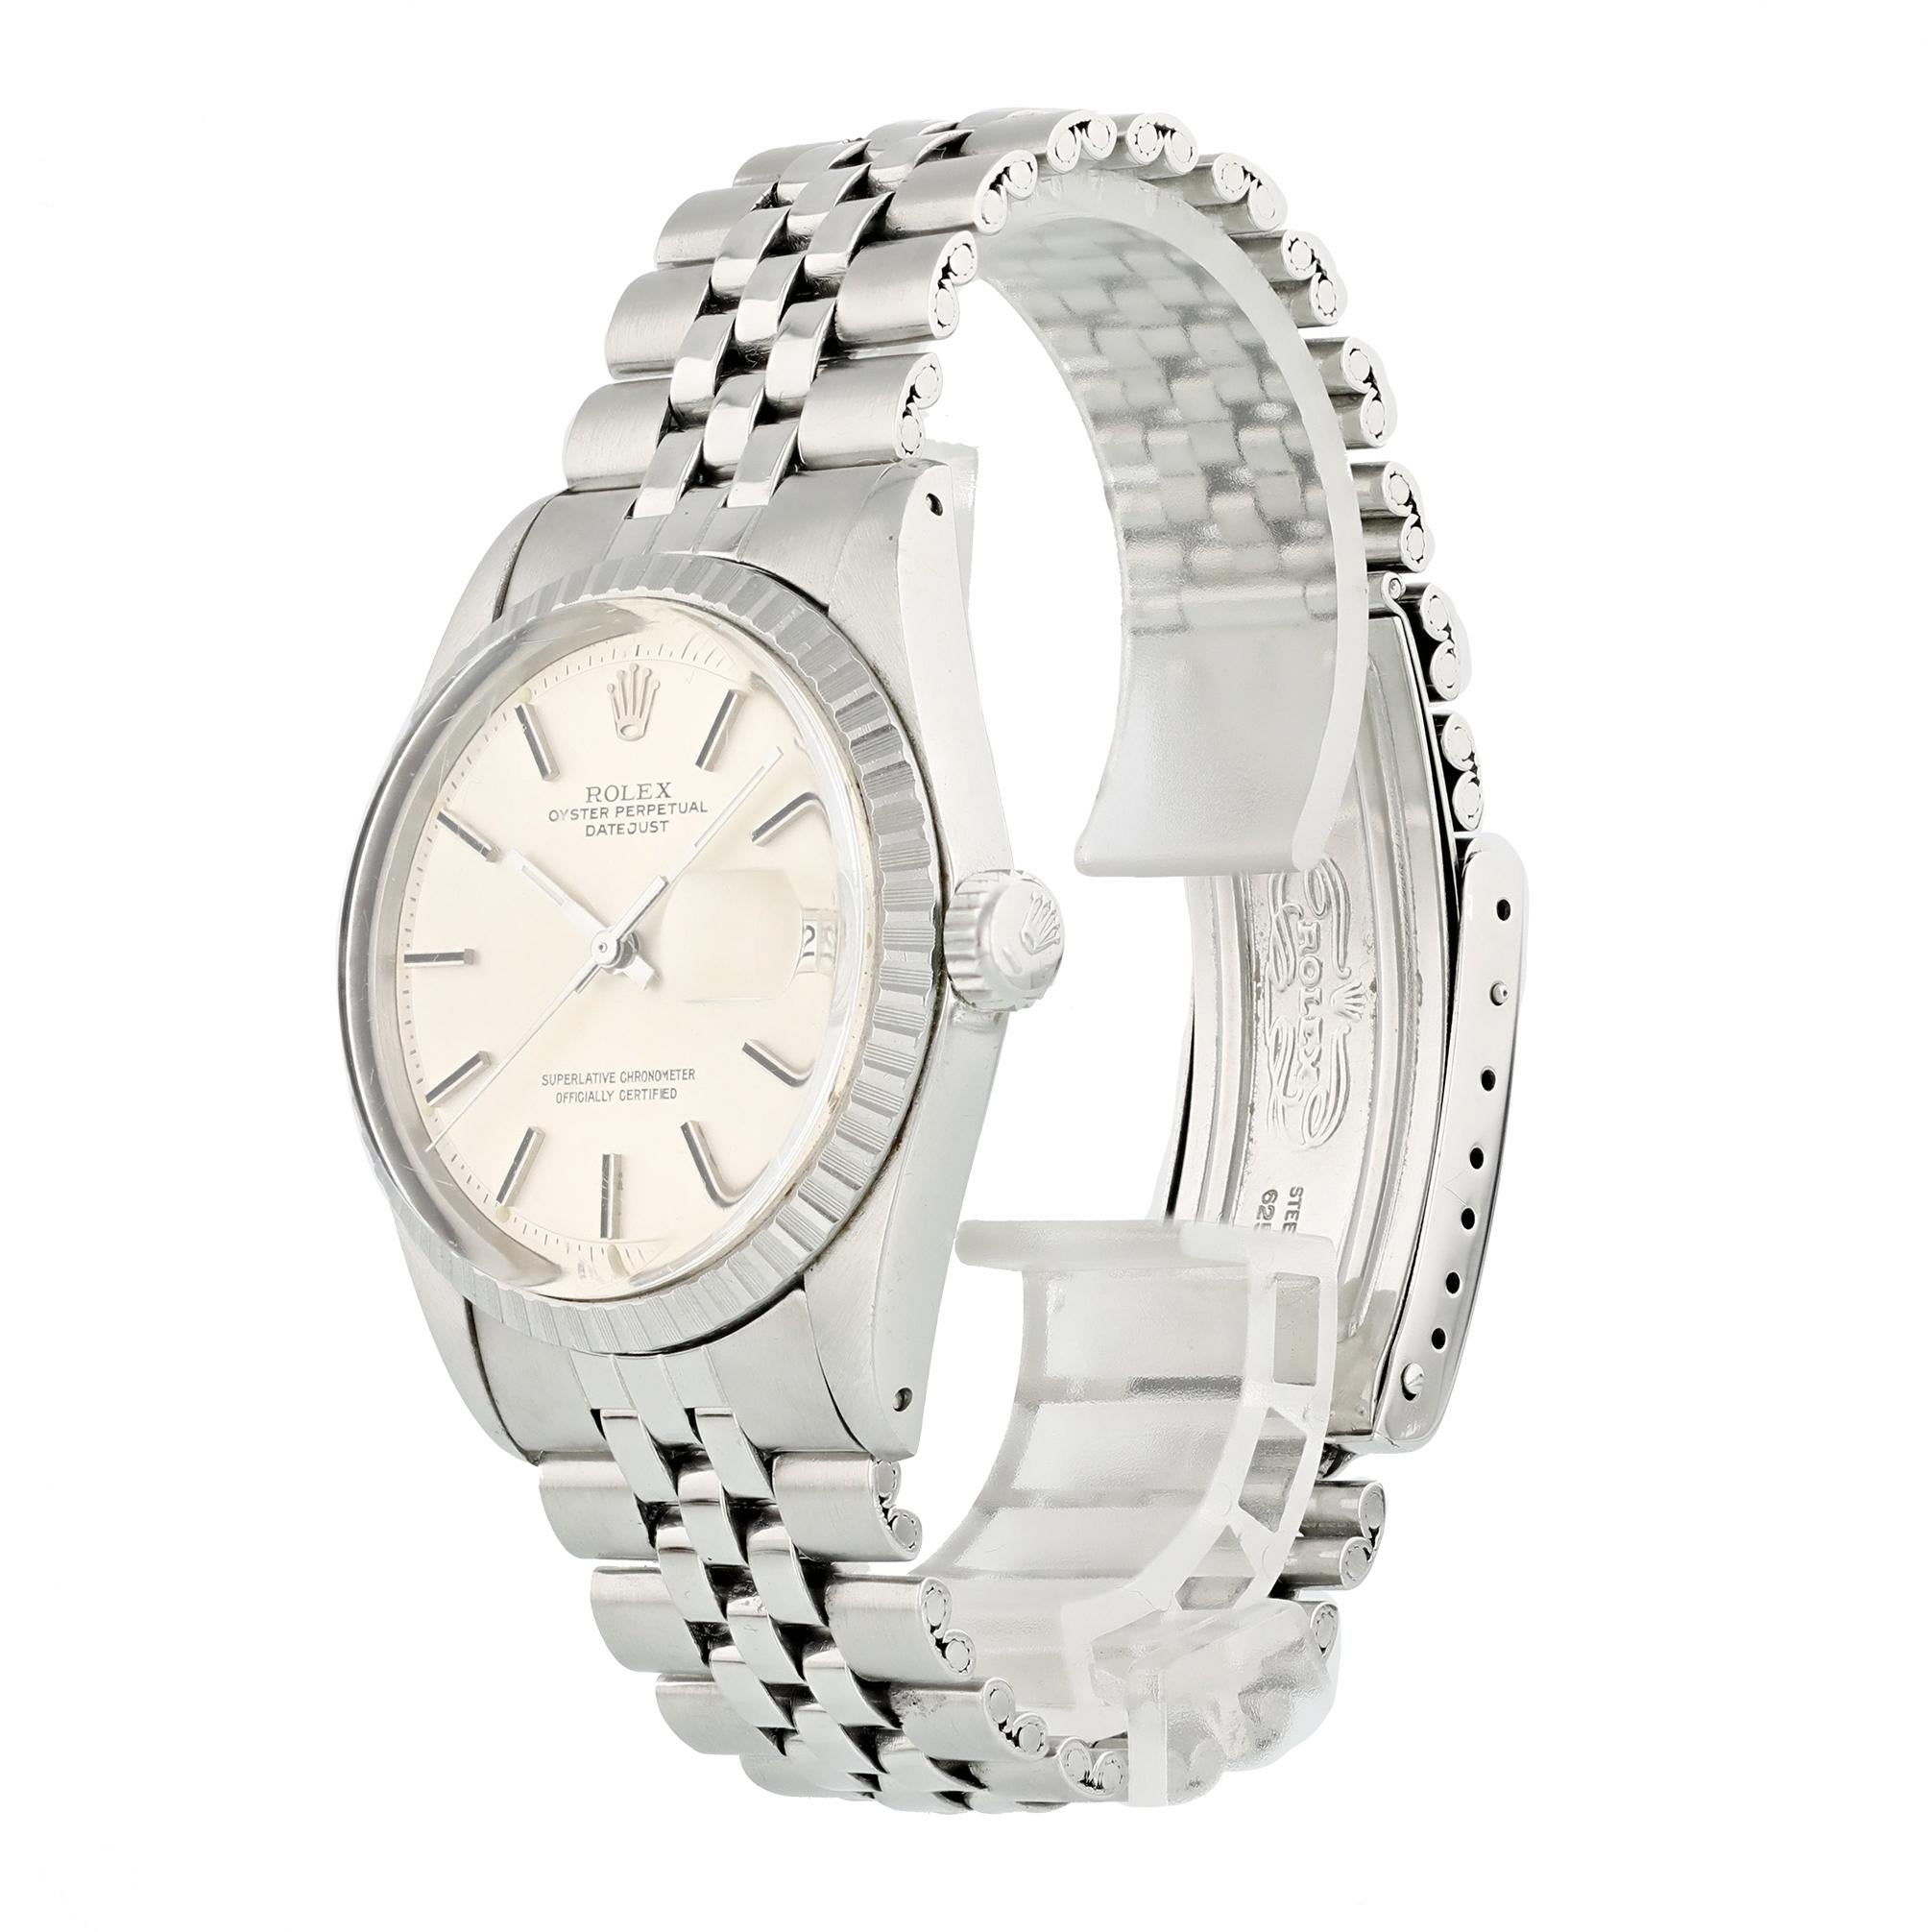 Rolex Datejust 1603 Men Watch. 
36mm Stainless Steel case. 
Stainless Steel Stationary bezel. 
Silver dial with Steel hands and index hour markers. 
Minute markers on the outer dial. 
Date display at the 3 o'clock position. 
Stainless Steel old